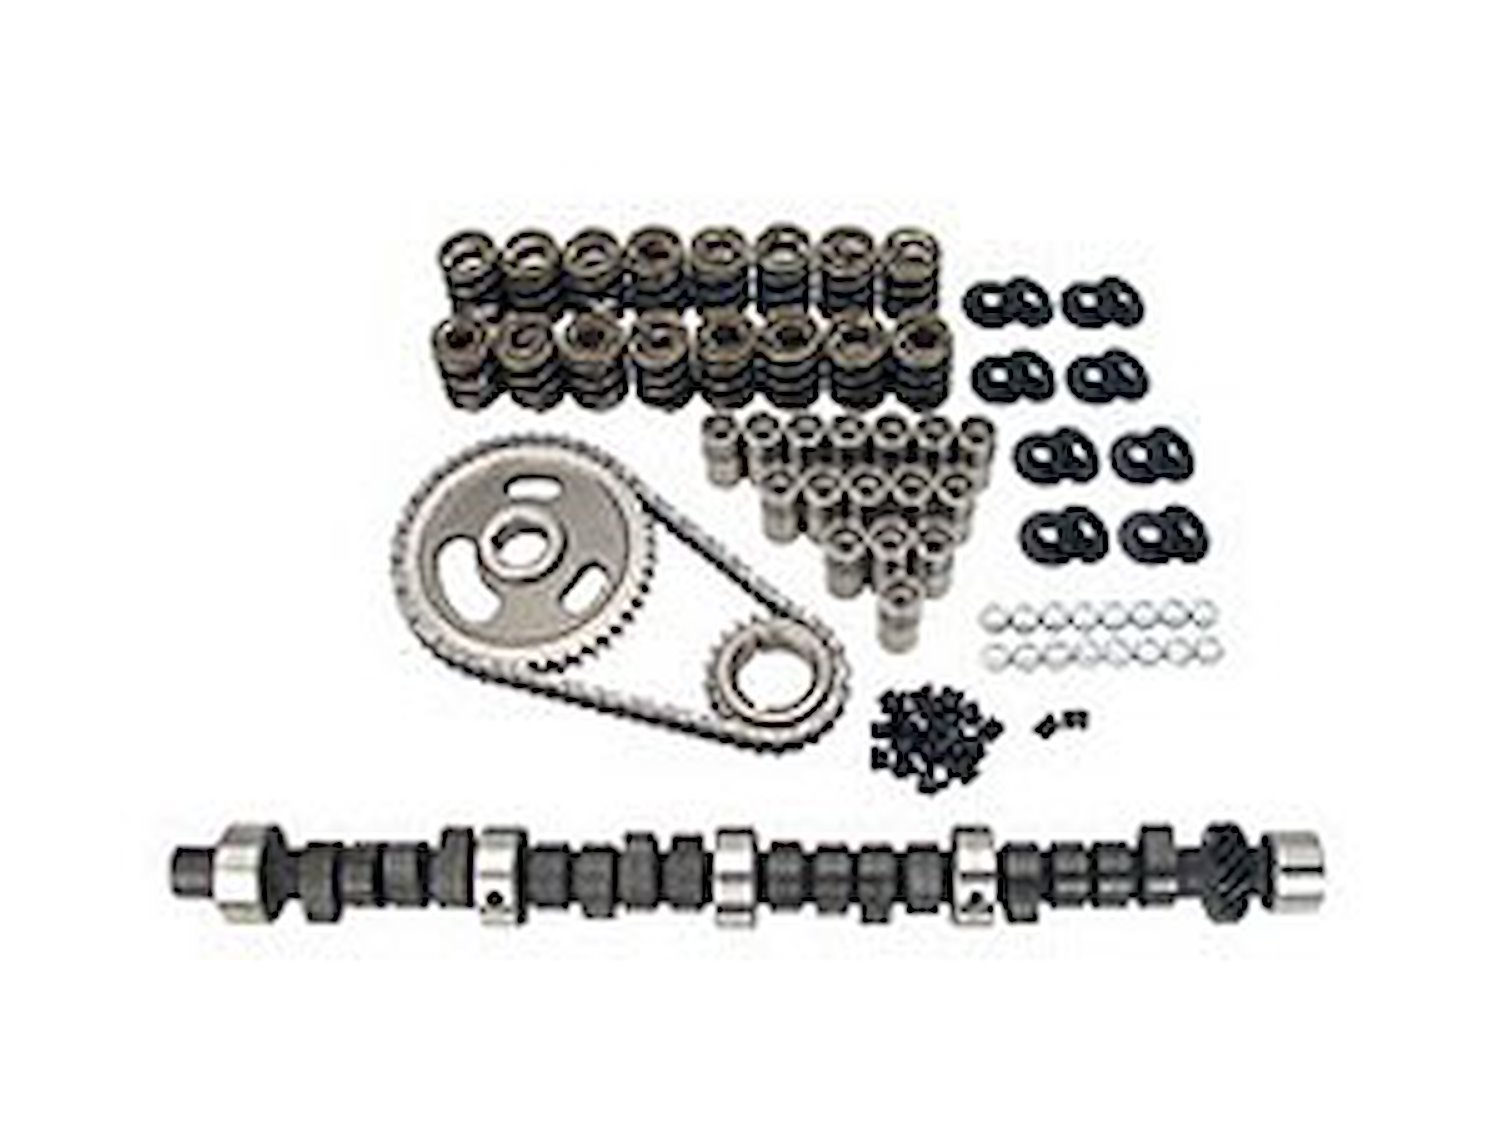 Thumpr Hydraulic Flat Tappet Camshaft Complete Kit Lift .491"/.476" Duration 279/296 RPM Range 2000-5800